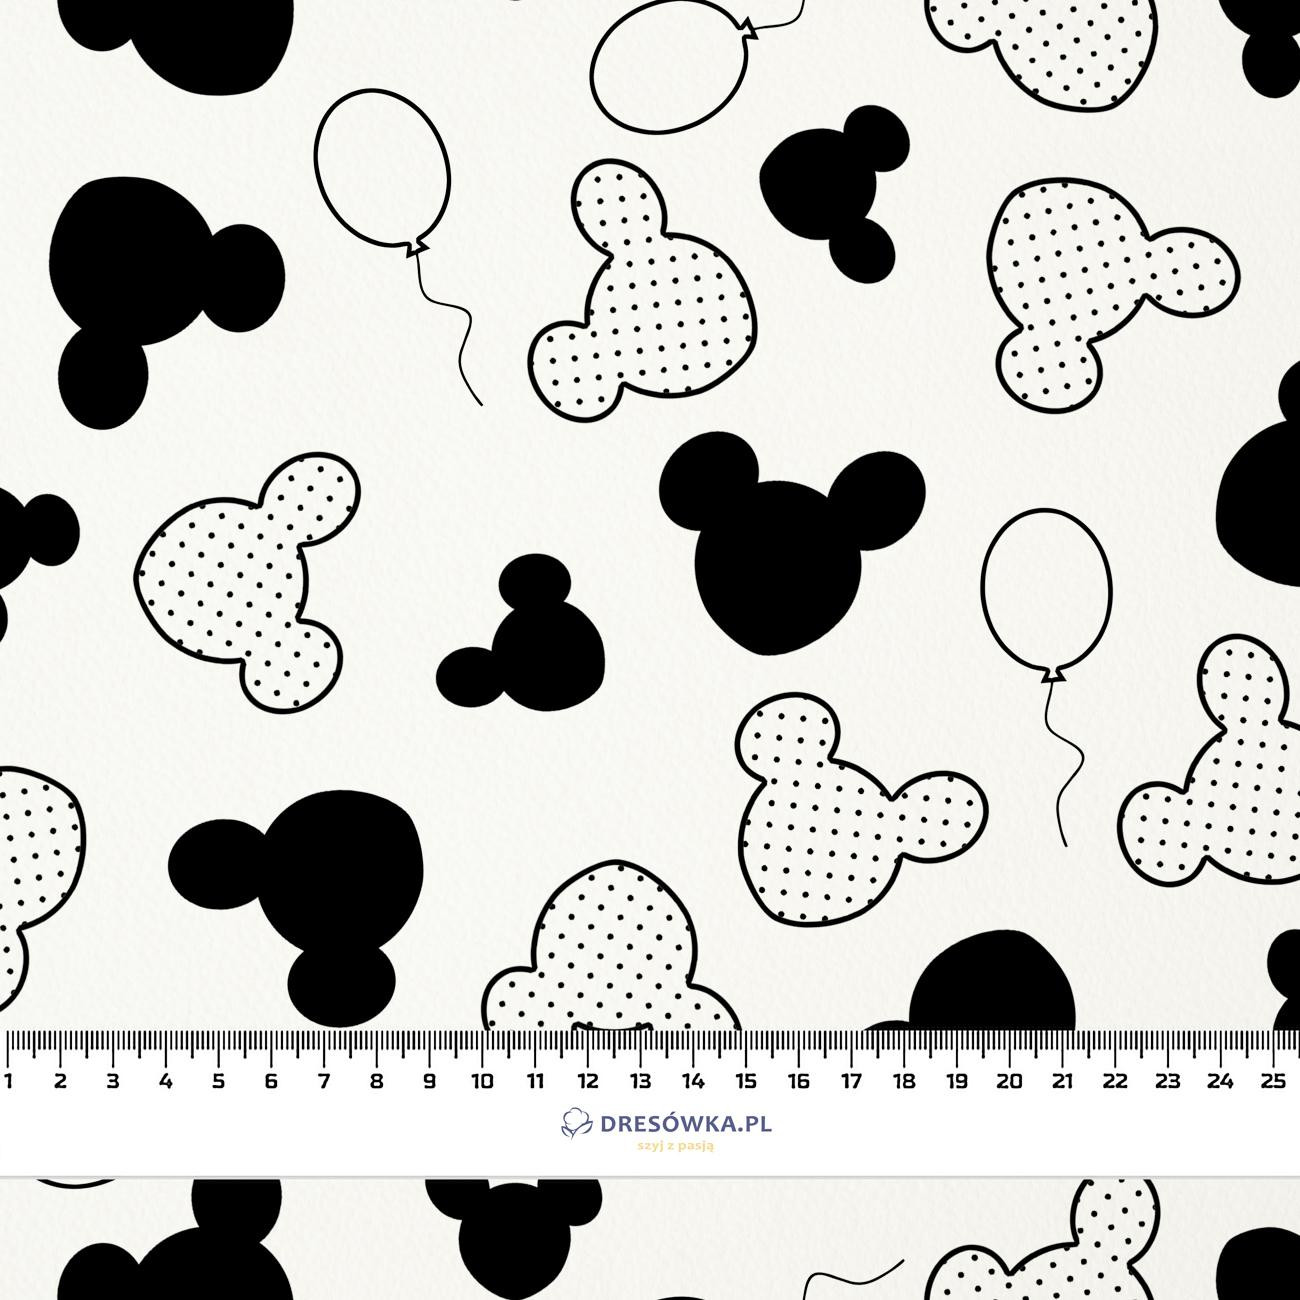 MOUSE PAT. 10 - quick-drying woven fabric